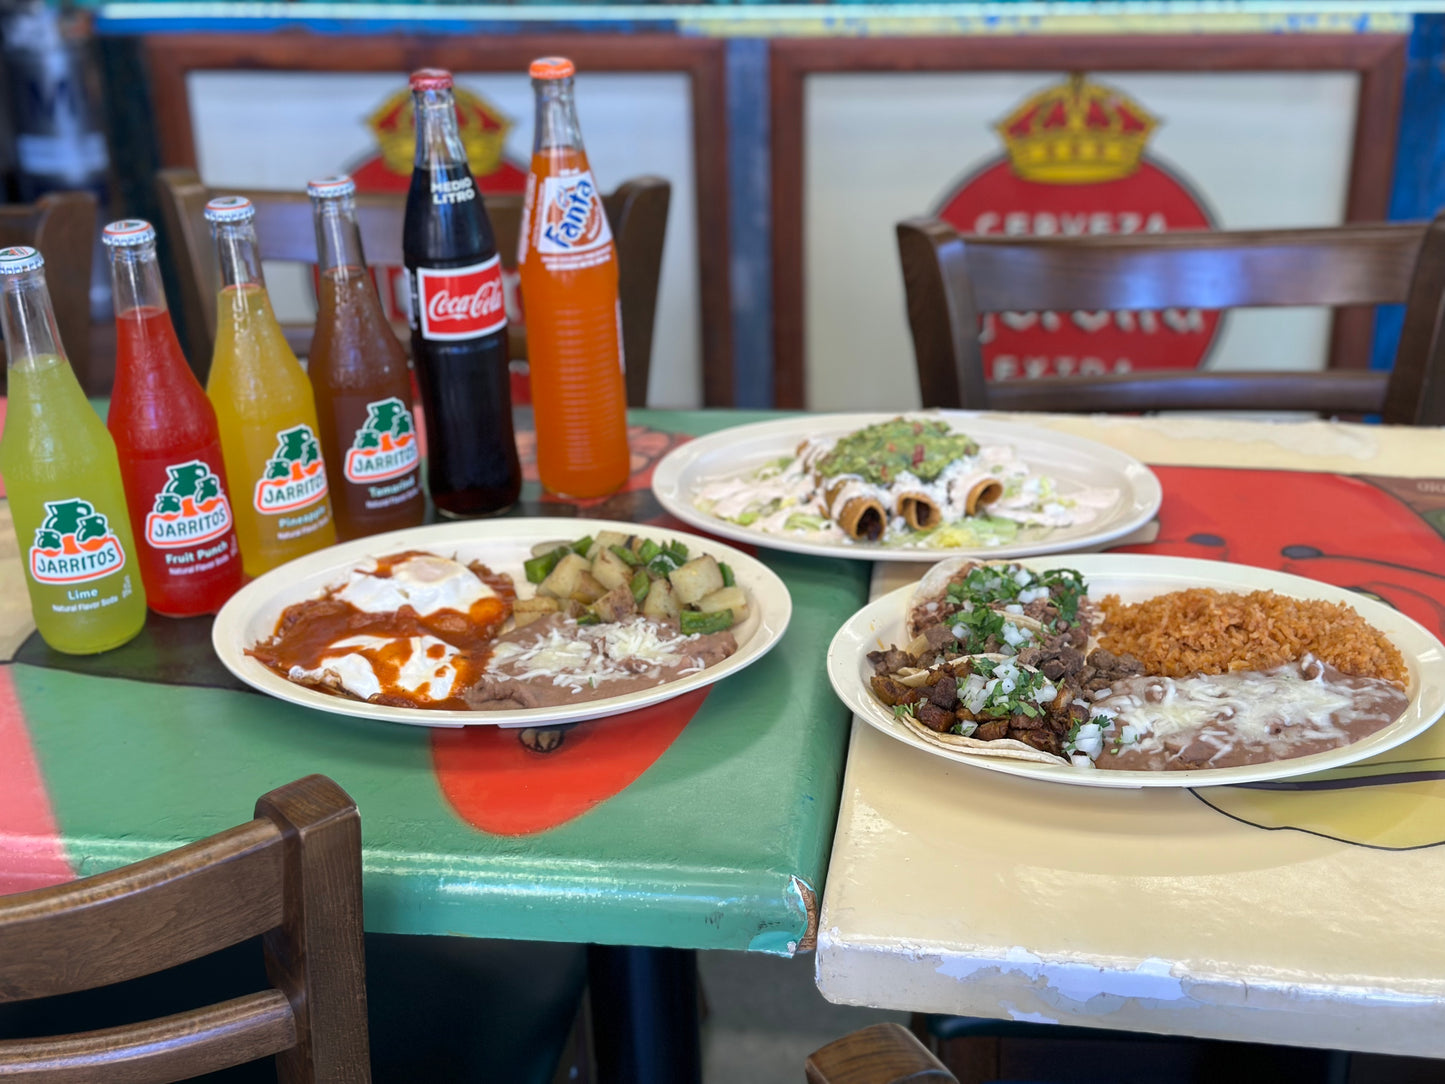 El Sanchito Fast Casual Mexican Food In Westlake Village! Get $25 Worth of Food and Drinks (Including Alcohol!) For just $12! May Purchase up to THREE Certificates!